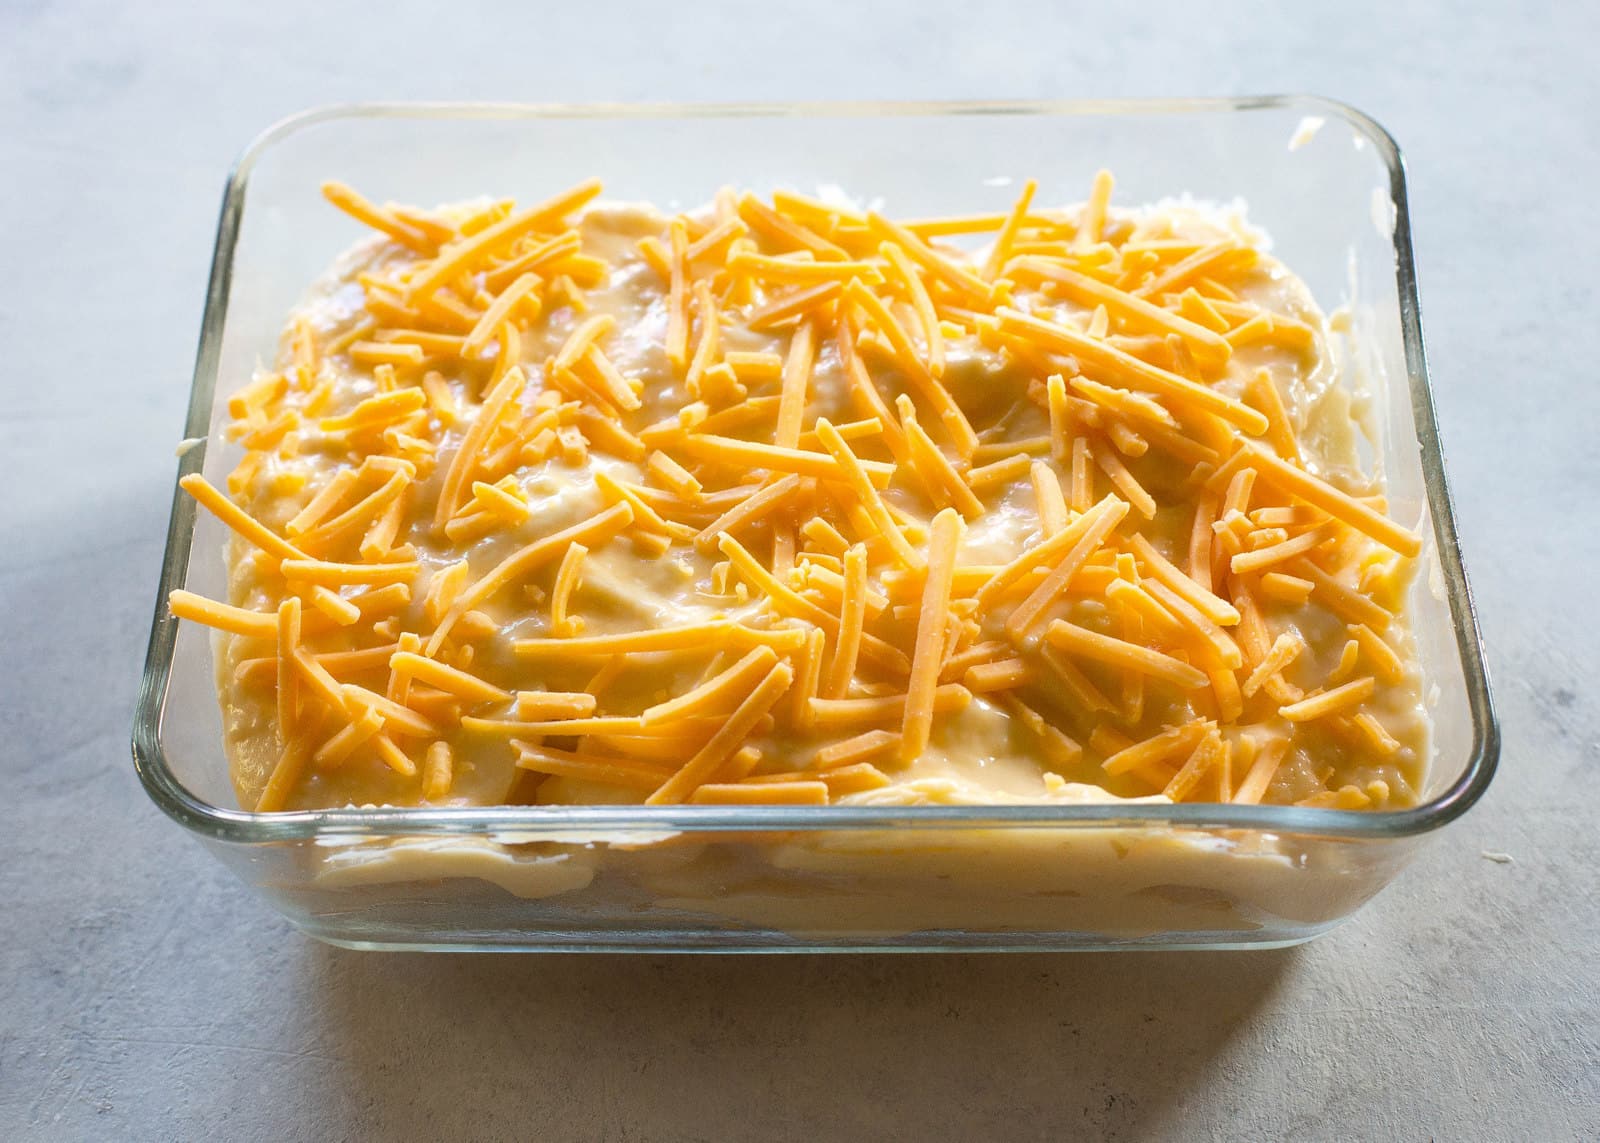 scalloped potatoes with cheese on top